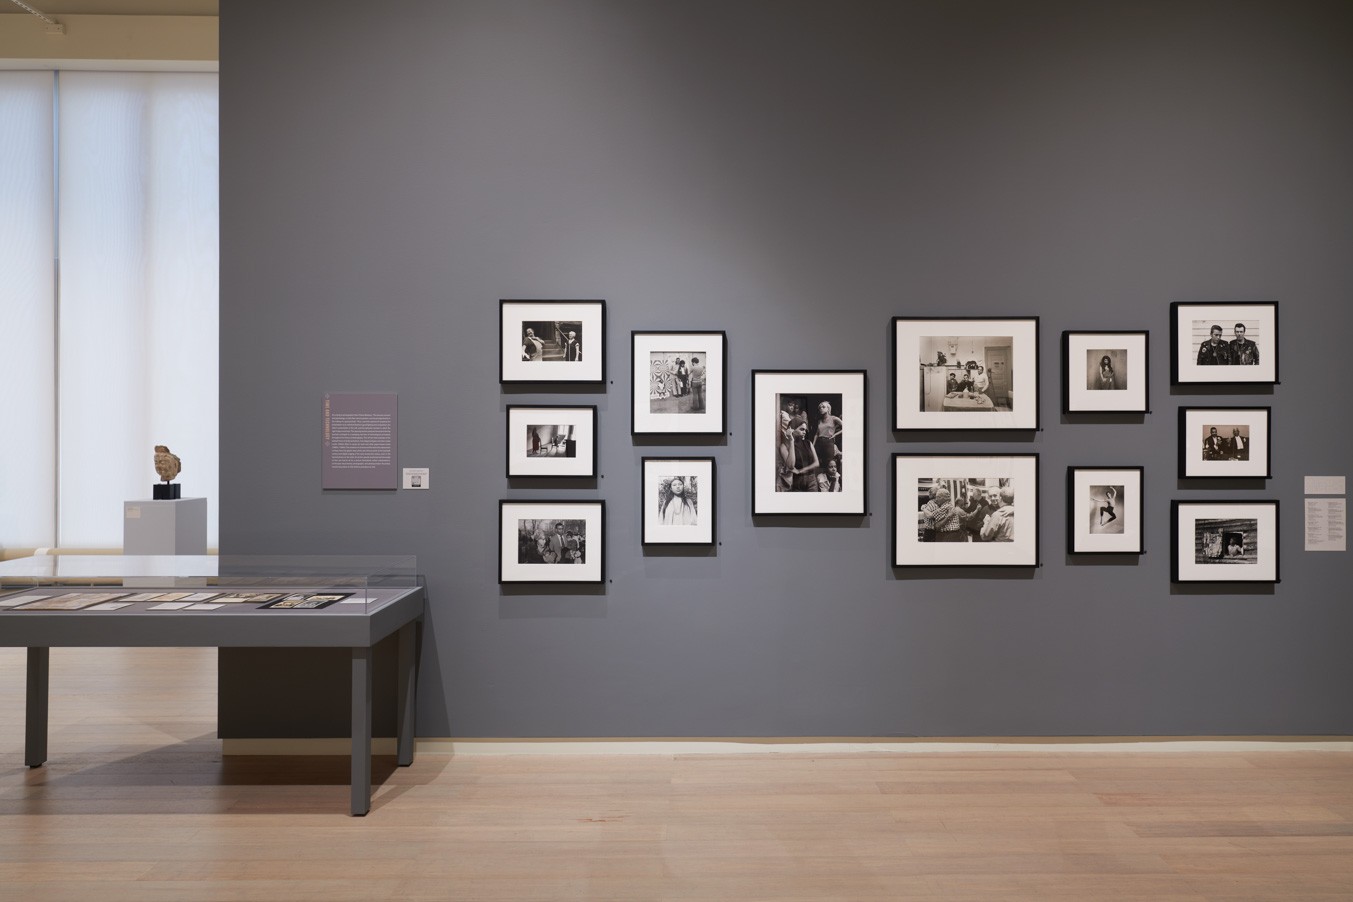 Installation view of the exhibition "Time and Face: Daguerreotypes to Digital Print", on view at the Wallach Art Gallery, Columbia University December 4, 2021-March 12, 2022.